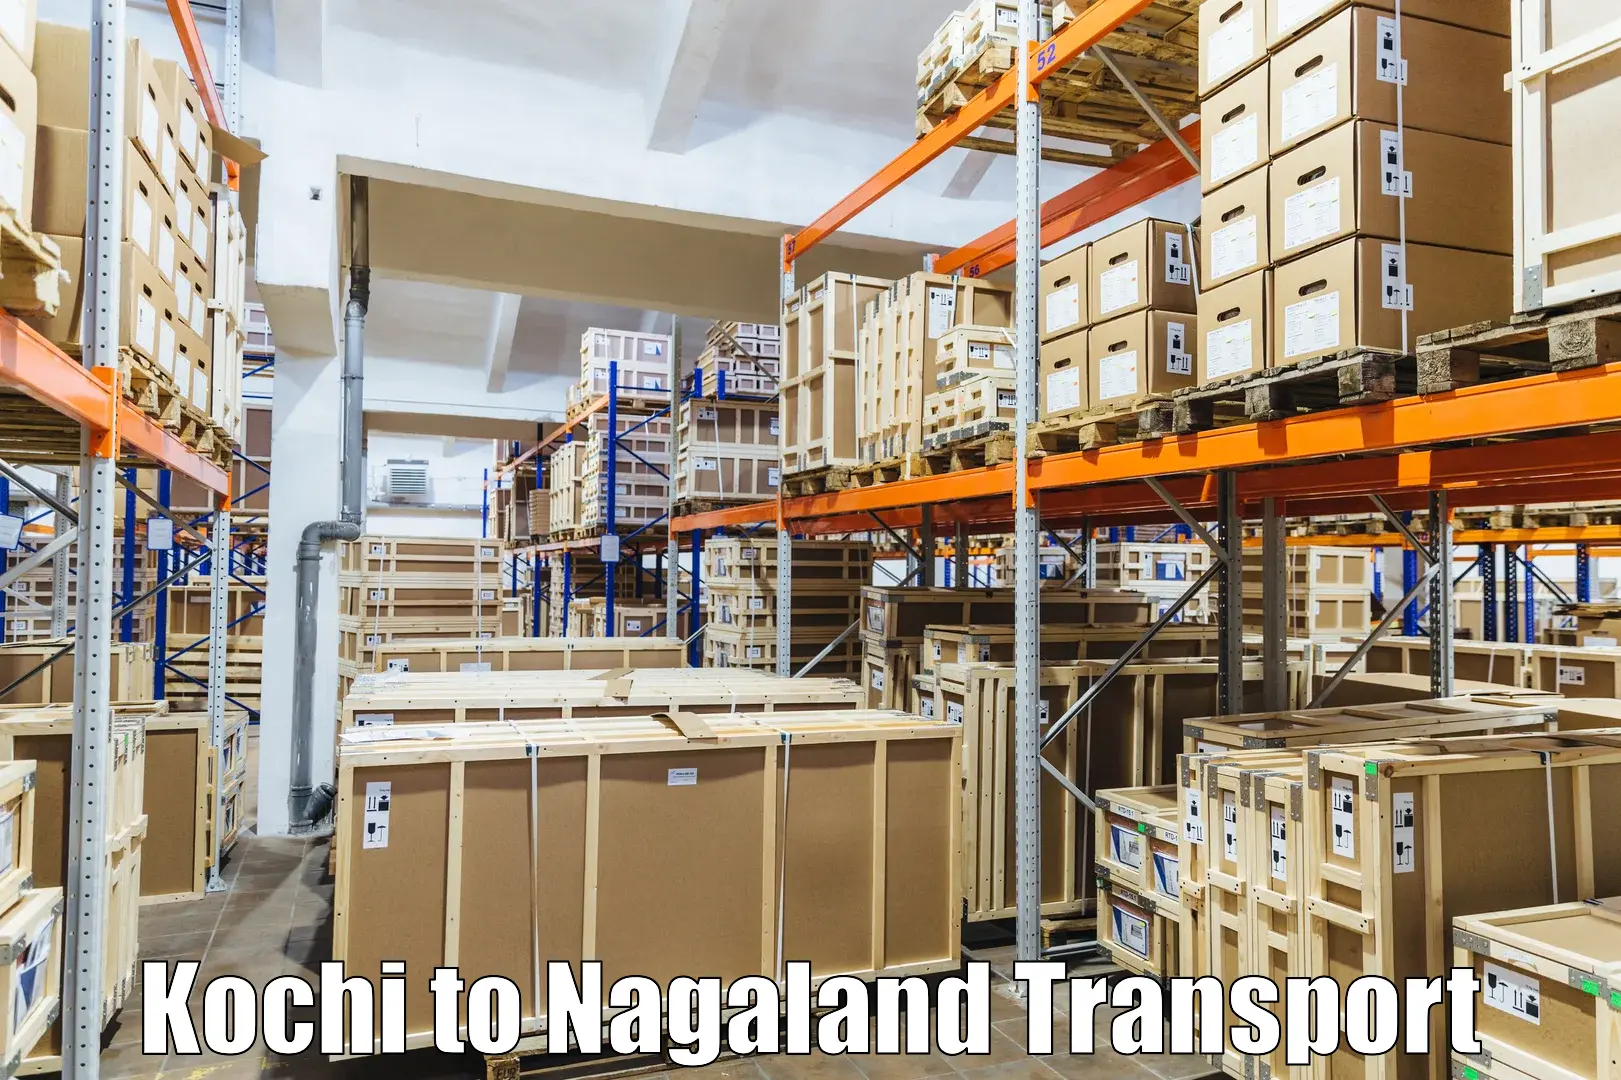 Container transport service Kochi to Nagaland